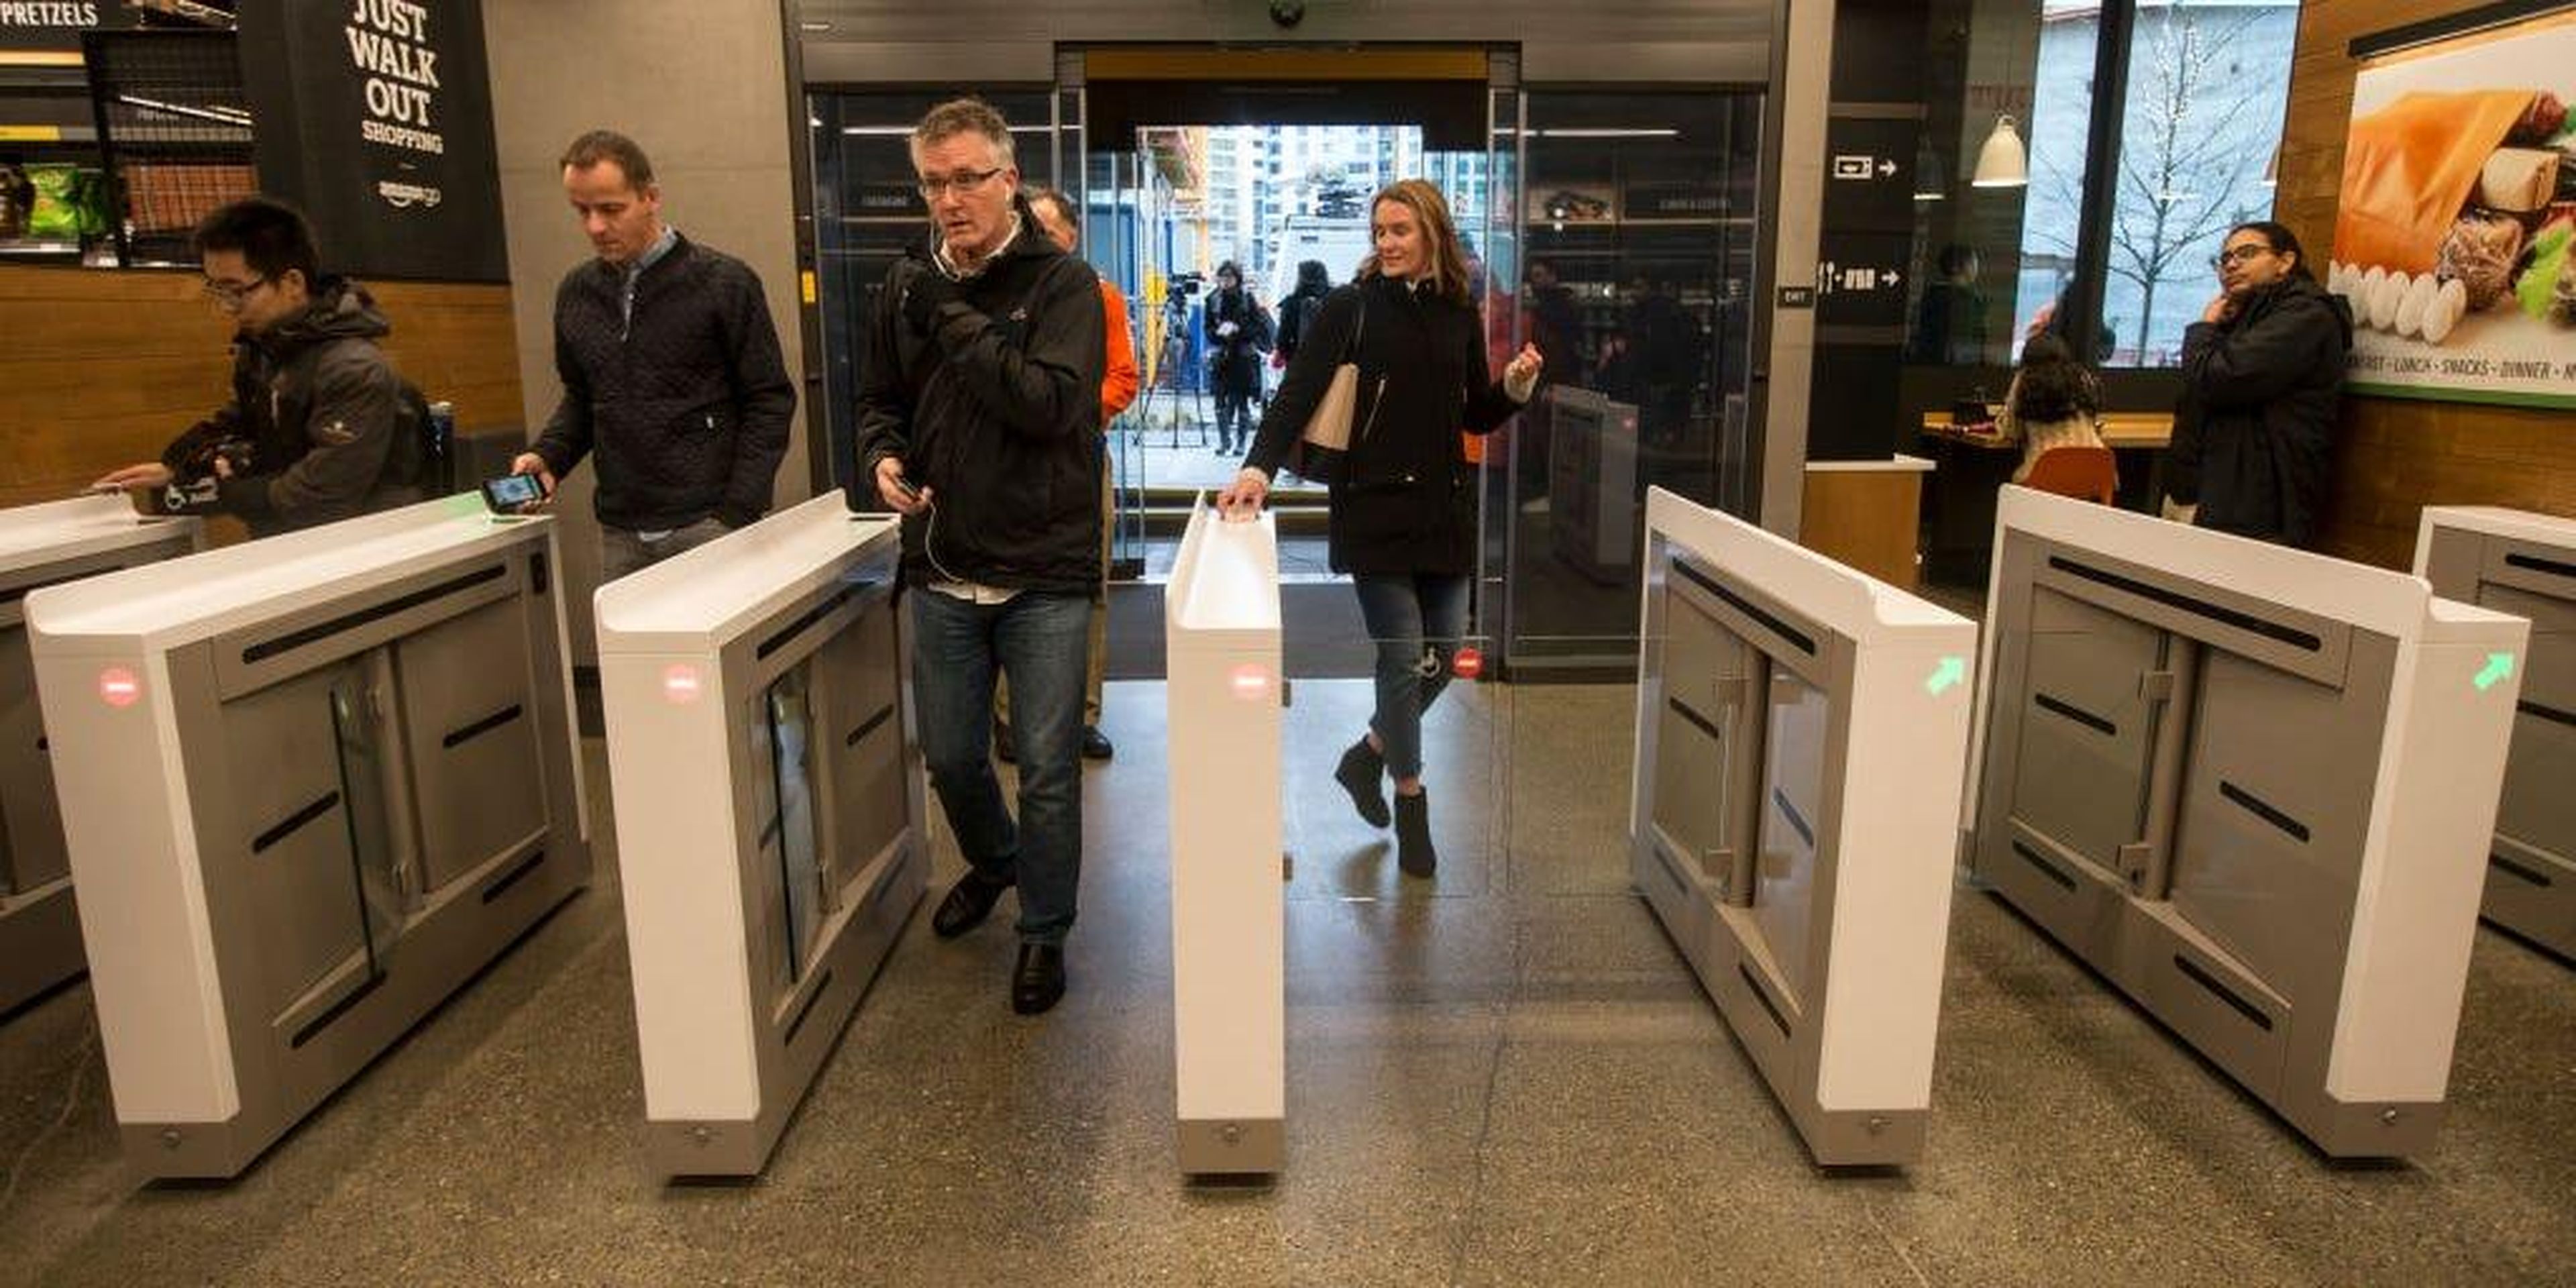 Before entering an Amazon Go store, customers must scan their smartphone so Amazon can figure out who they are.